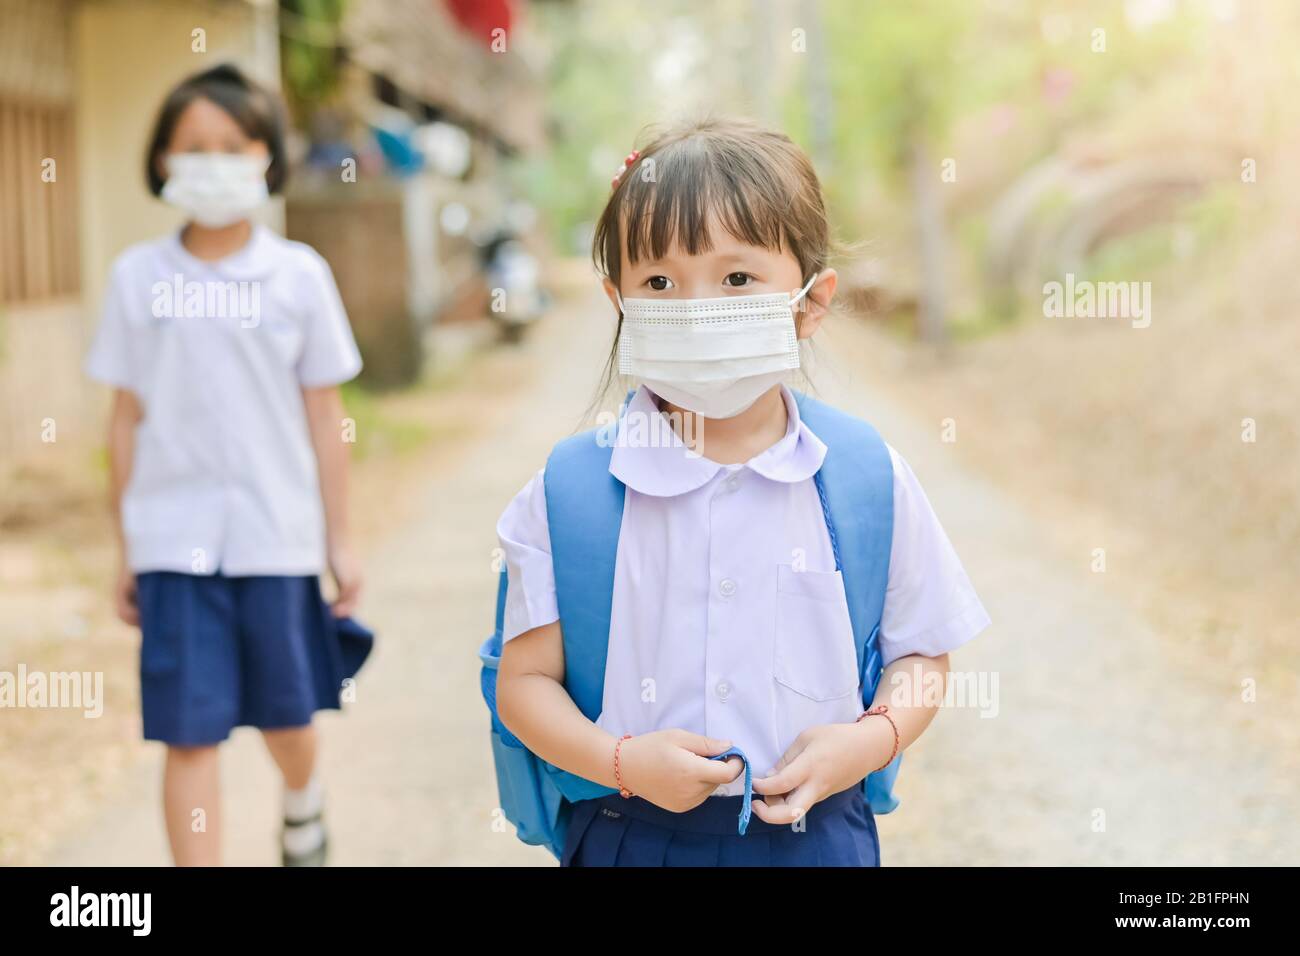 Little school girl has mask protect herself from Corona virus COVID-19 when child go to school,Student with a mask on her nose for safety outdoor Stock Photo